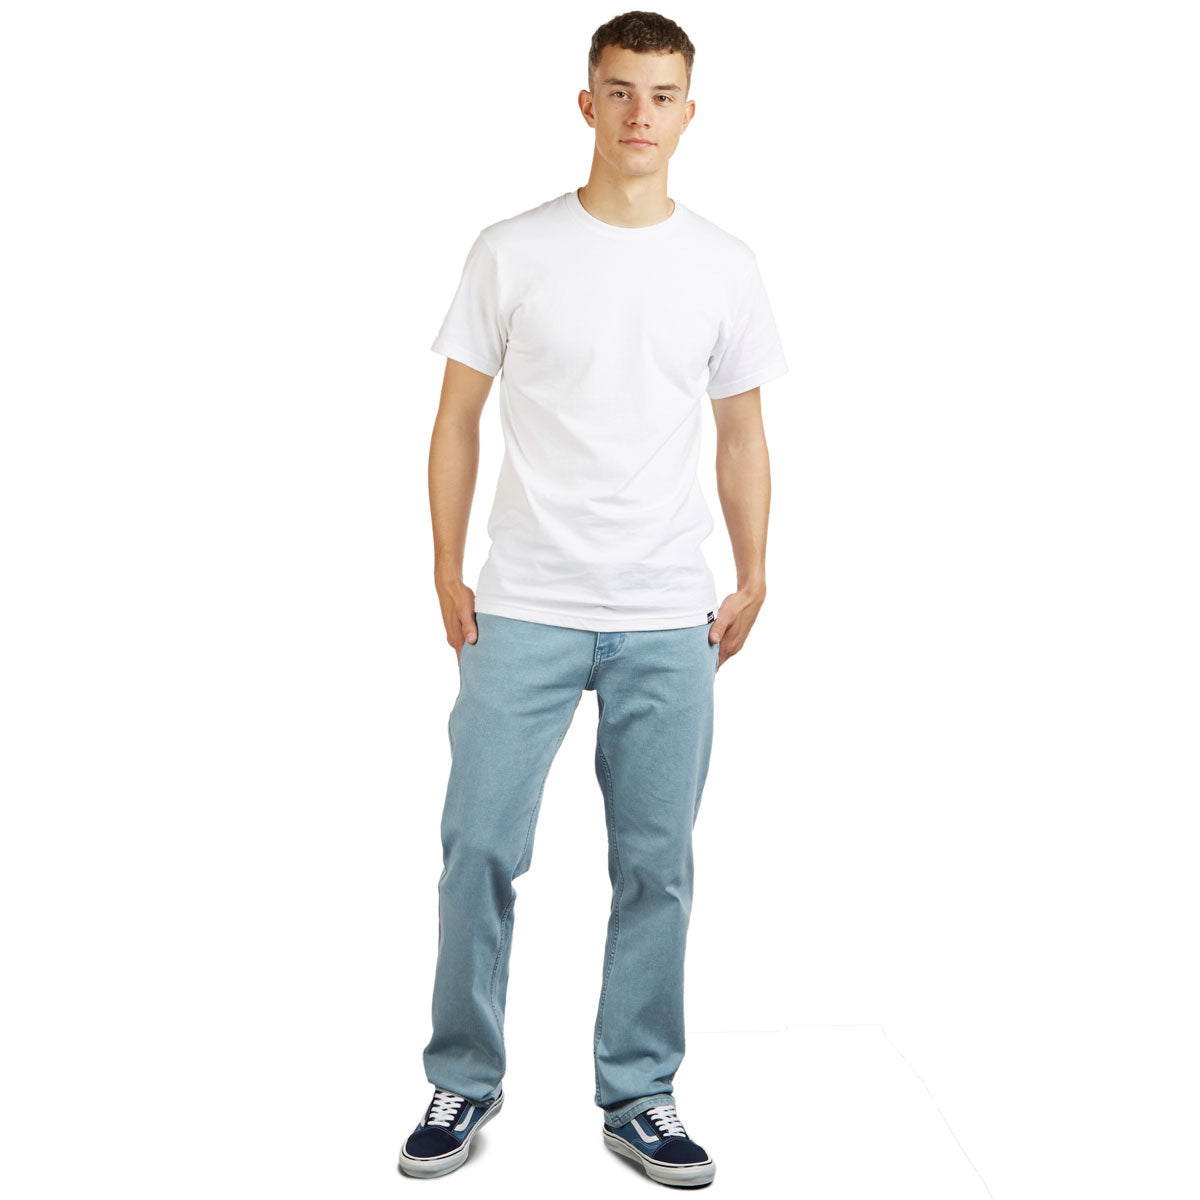 CCS Standard Plus Relaxed Denim Jeans - New Wash image 2